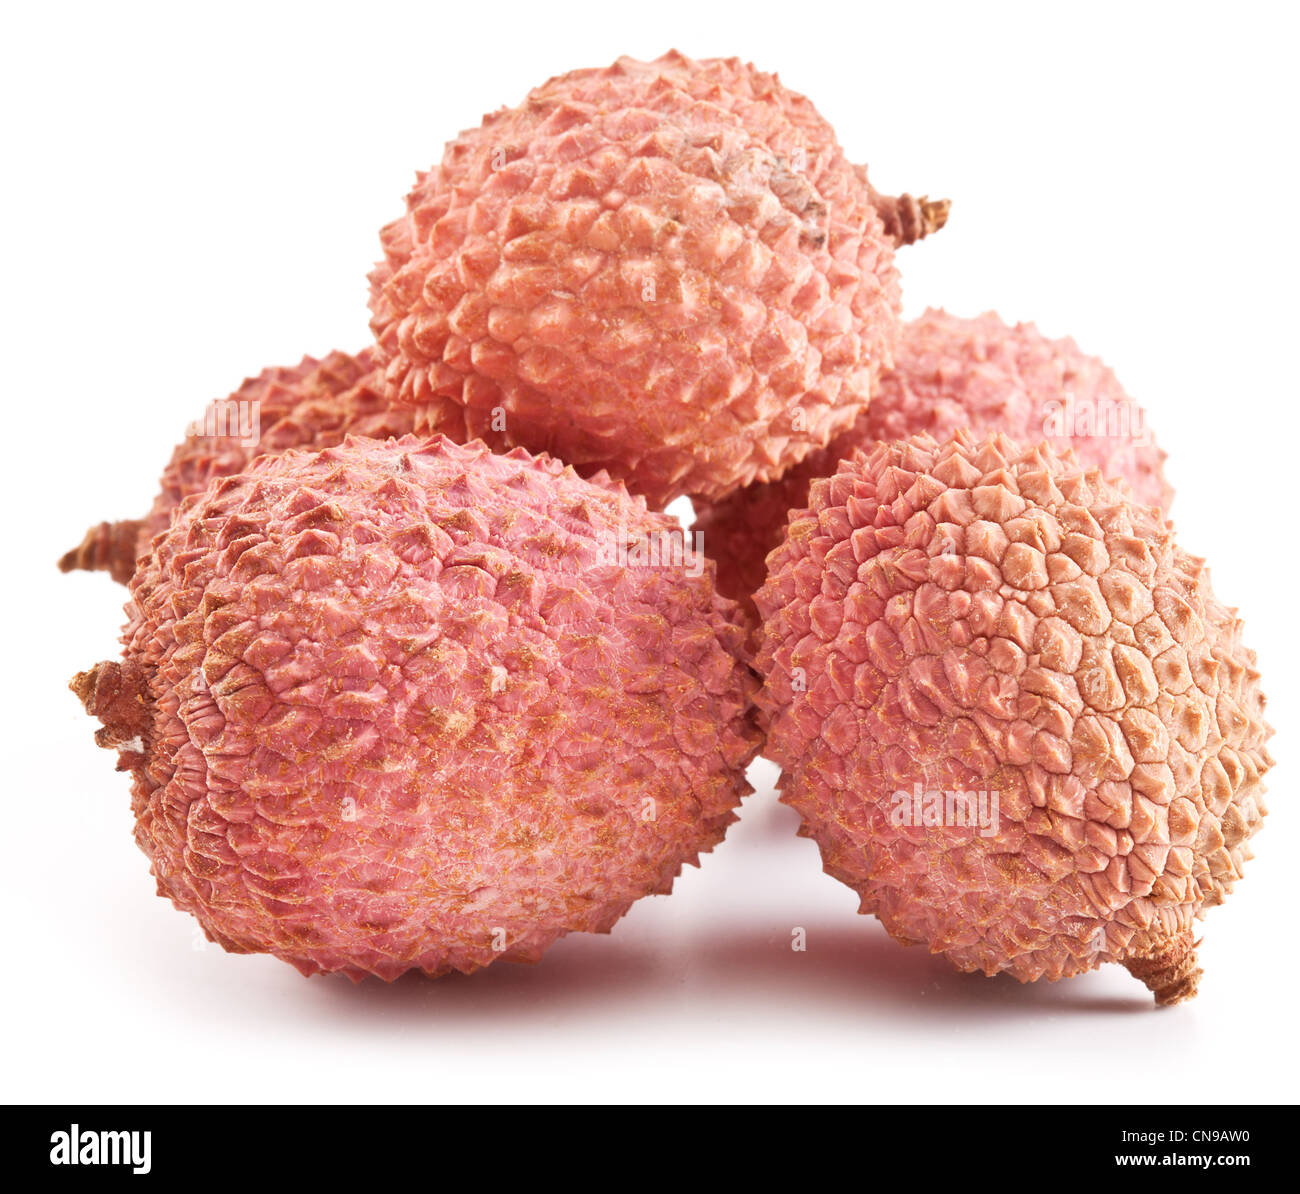 Lychee on a white background. Stock Photo